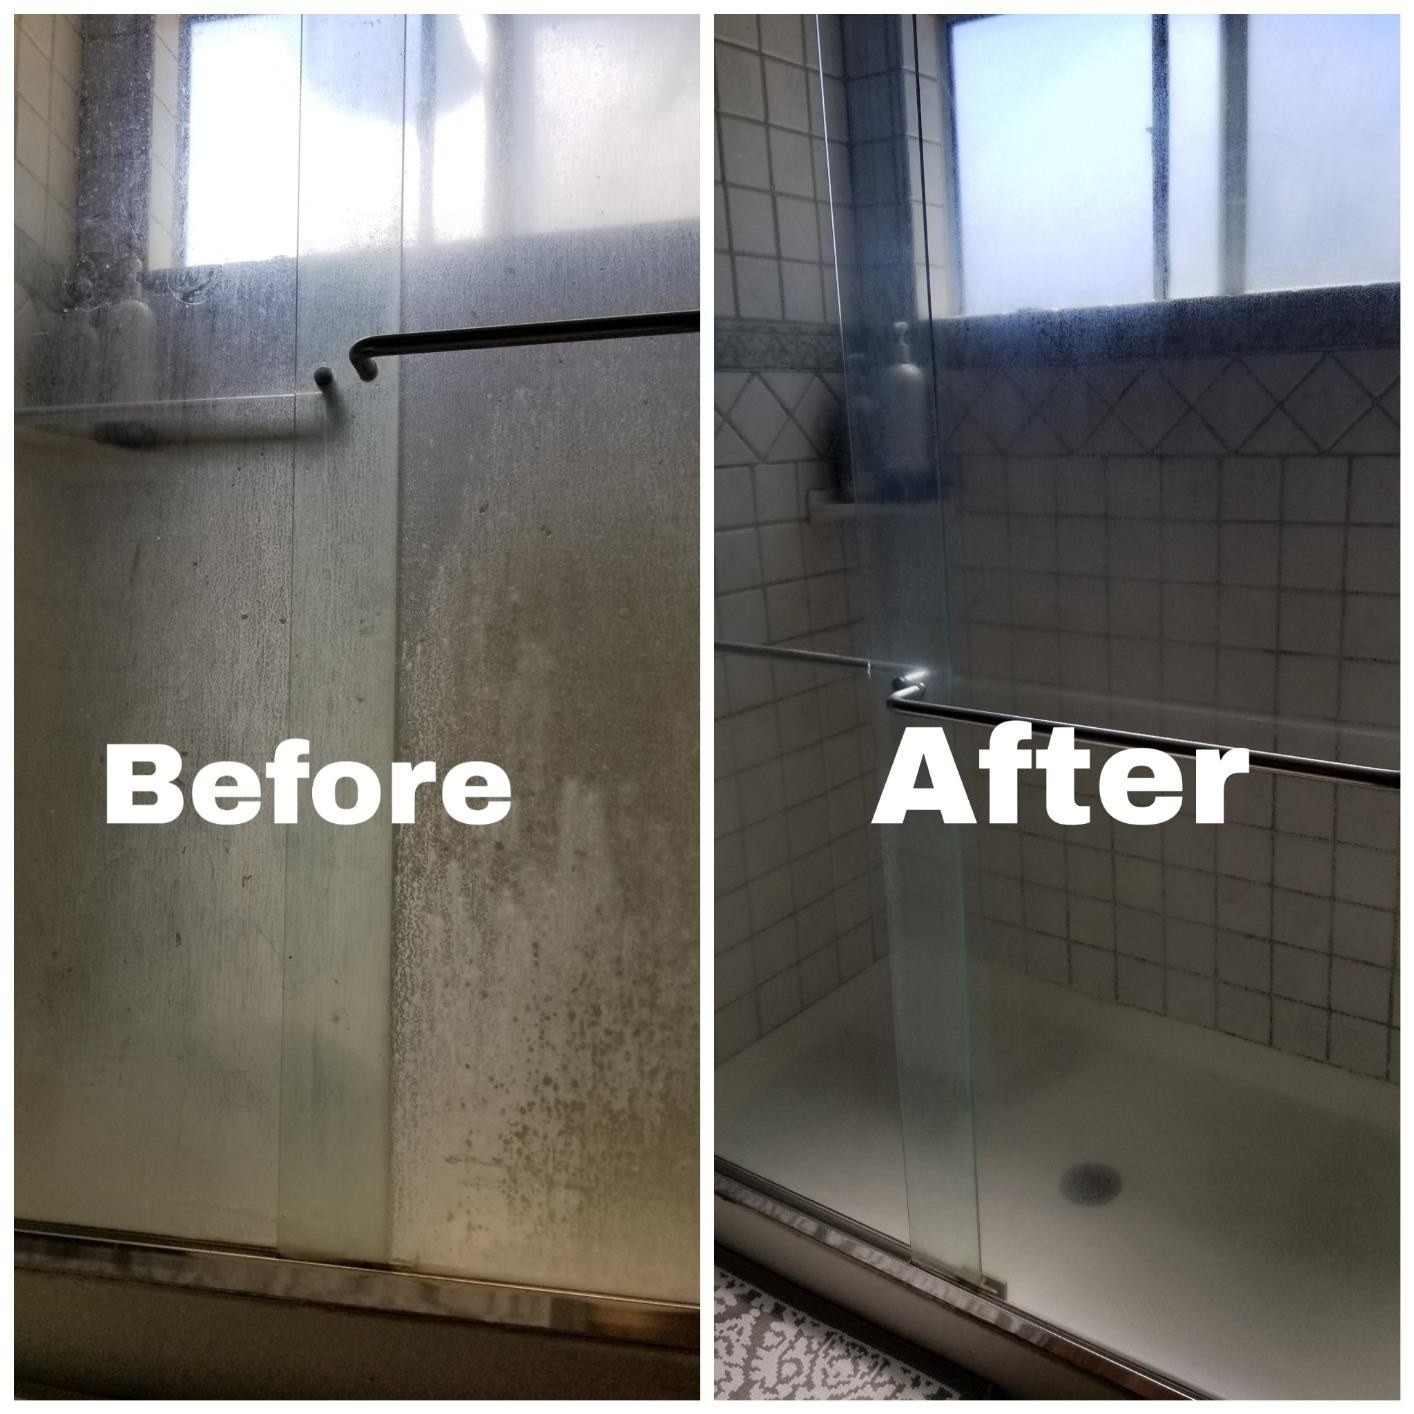 Reviewer glass shower door with hard water stain and after photo of the same door, which is now free of water stains